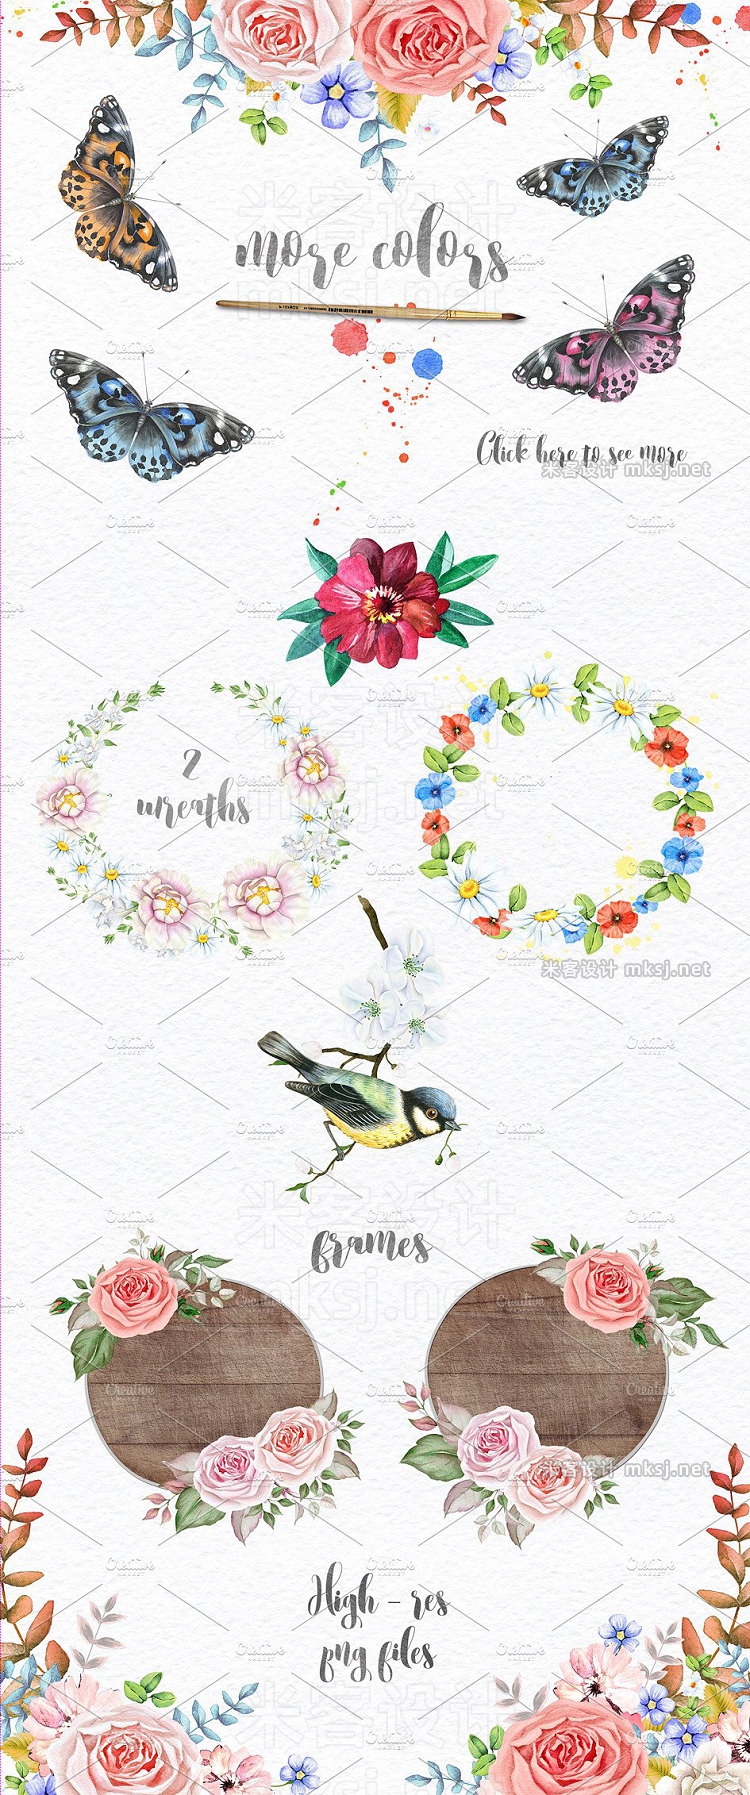 png素材 Wreaths and Bouquets collection V2